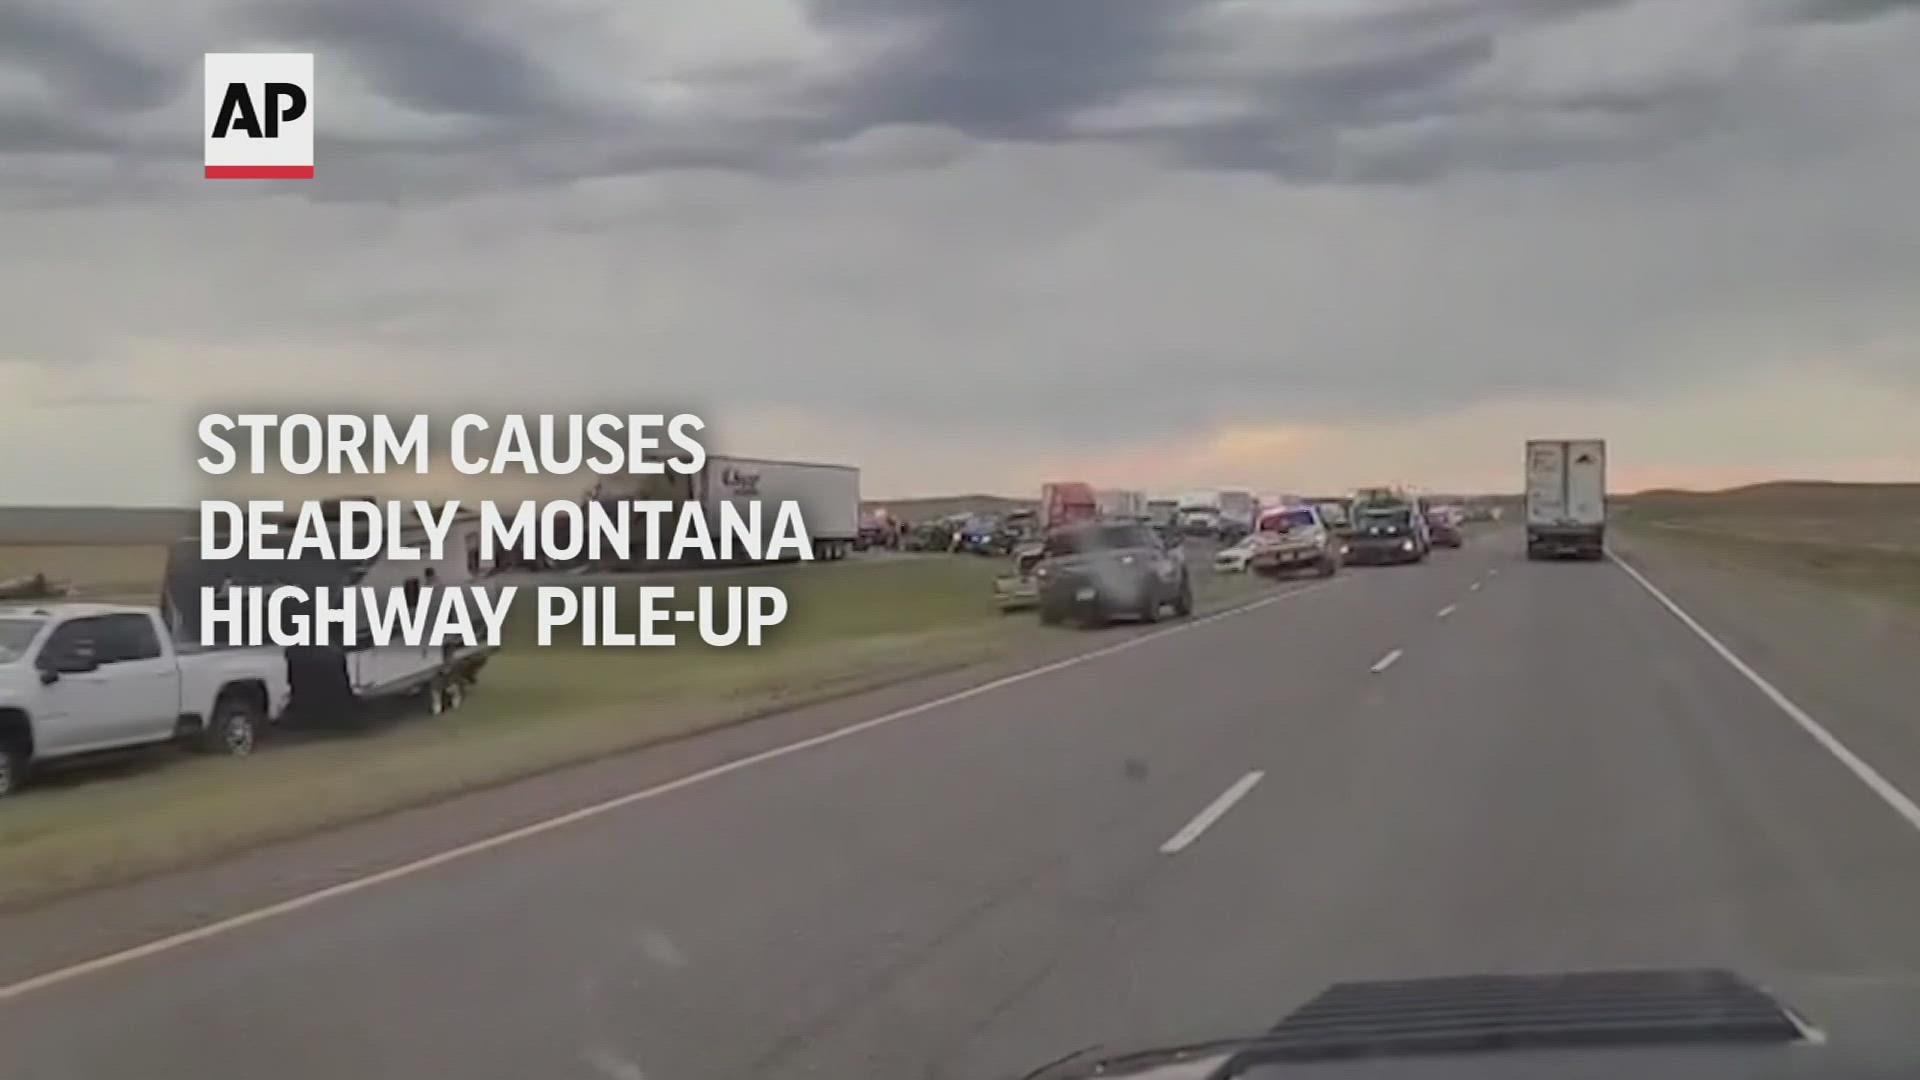 Authorities say six people have died after a pileup Friday evening on Interstate 90 in Montana.